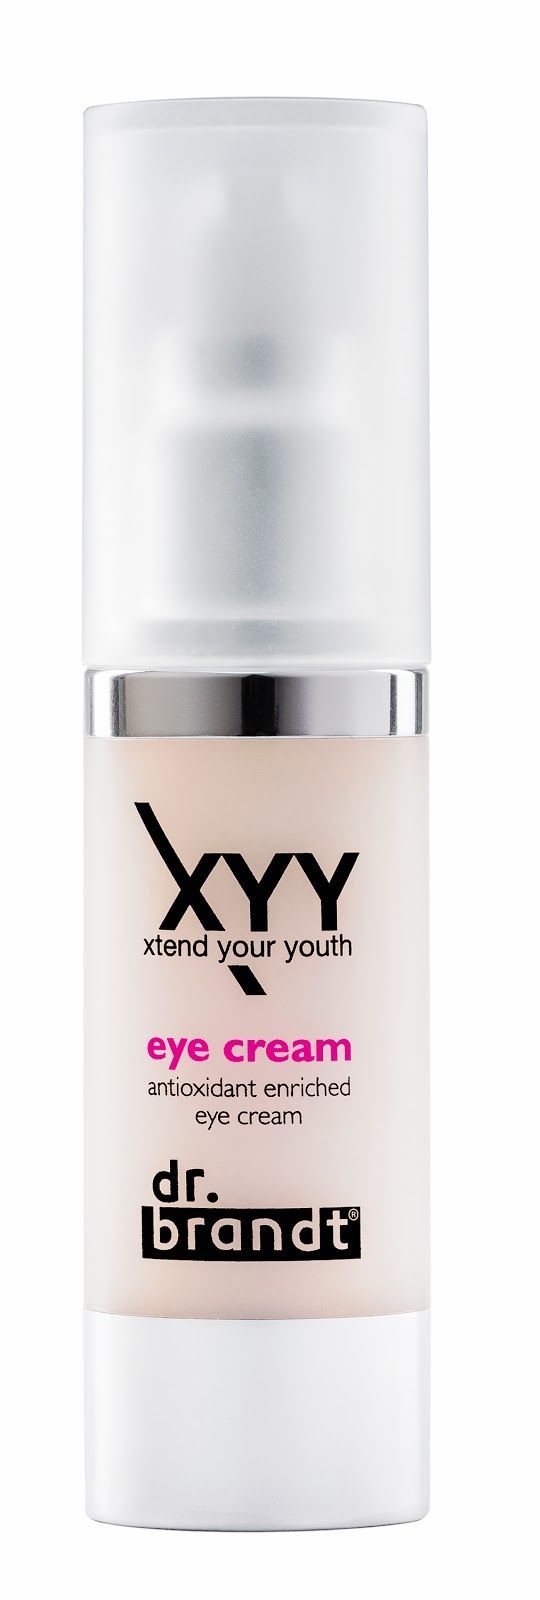 Xtend Your Youth eye cream